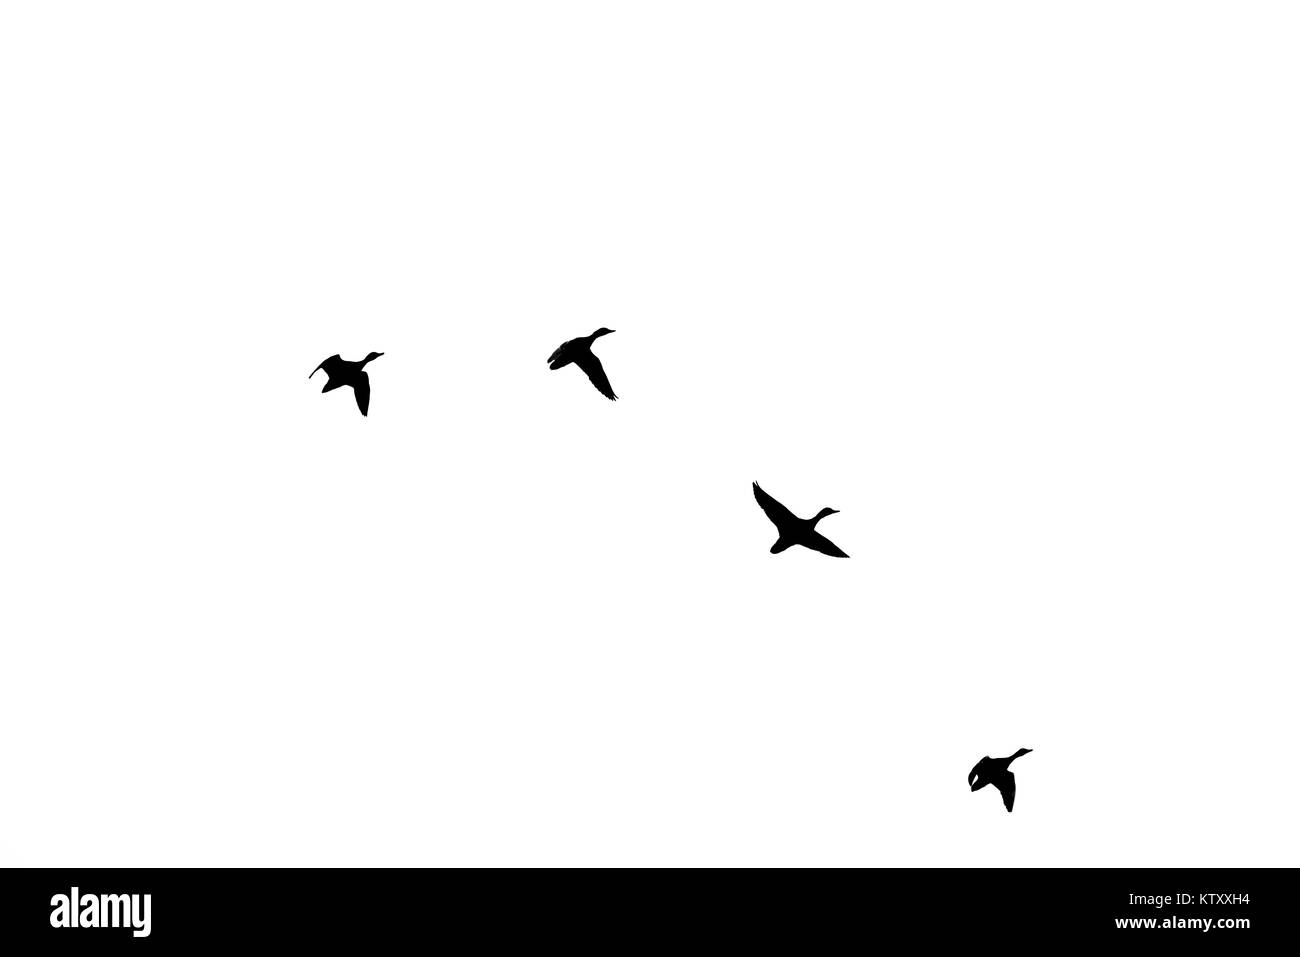 Silhouette of ducks flying in a formation during migration Stock Photo